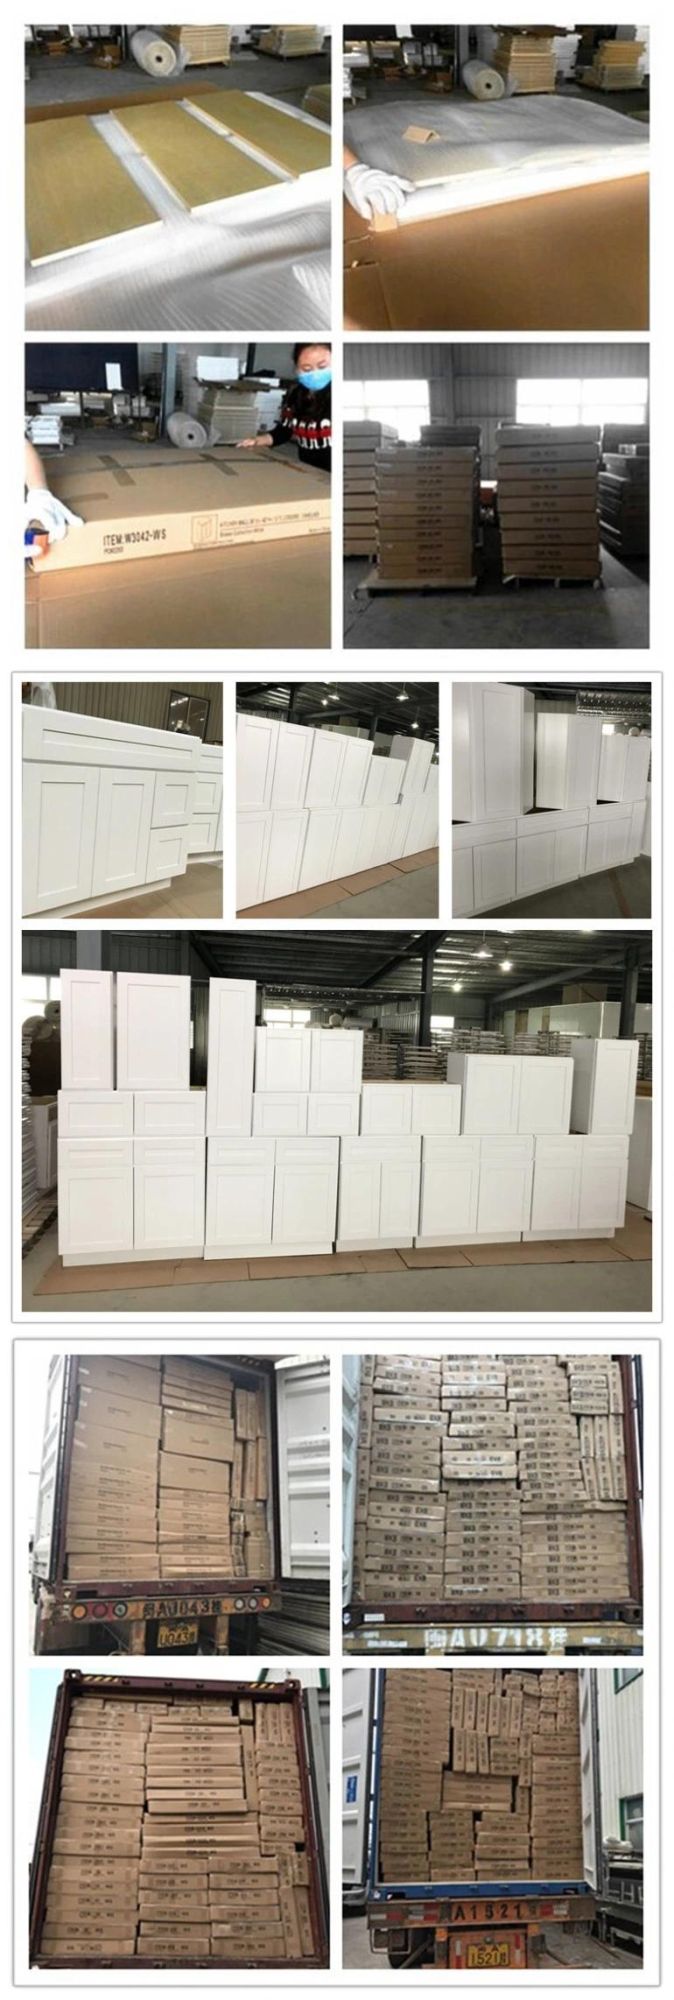 New Model Used Kitchen Cabinet Doors From China